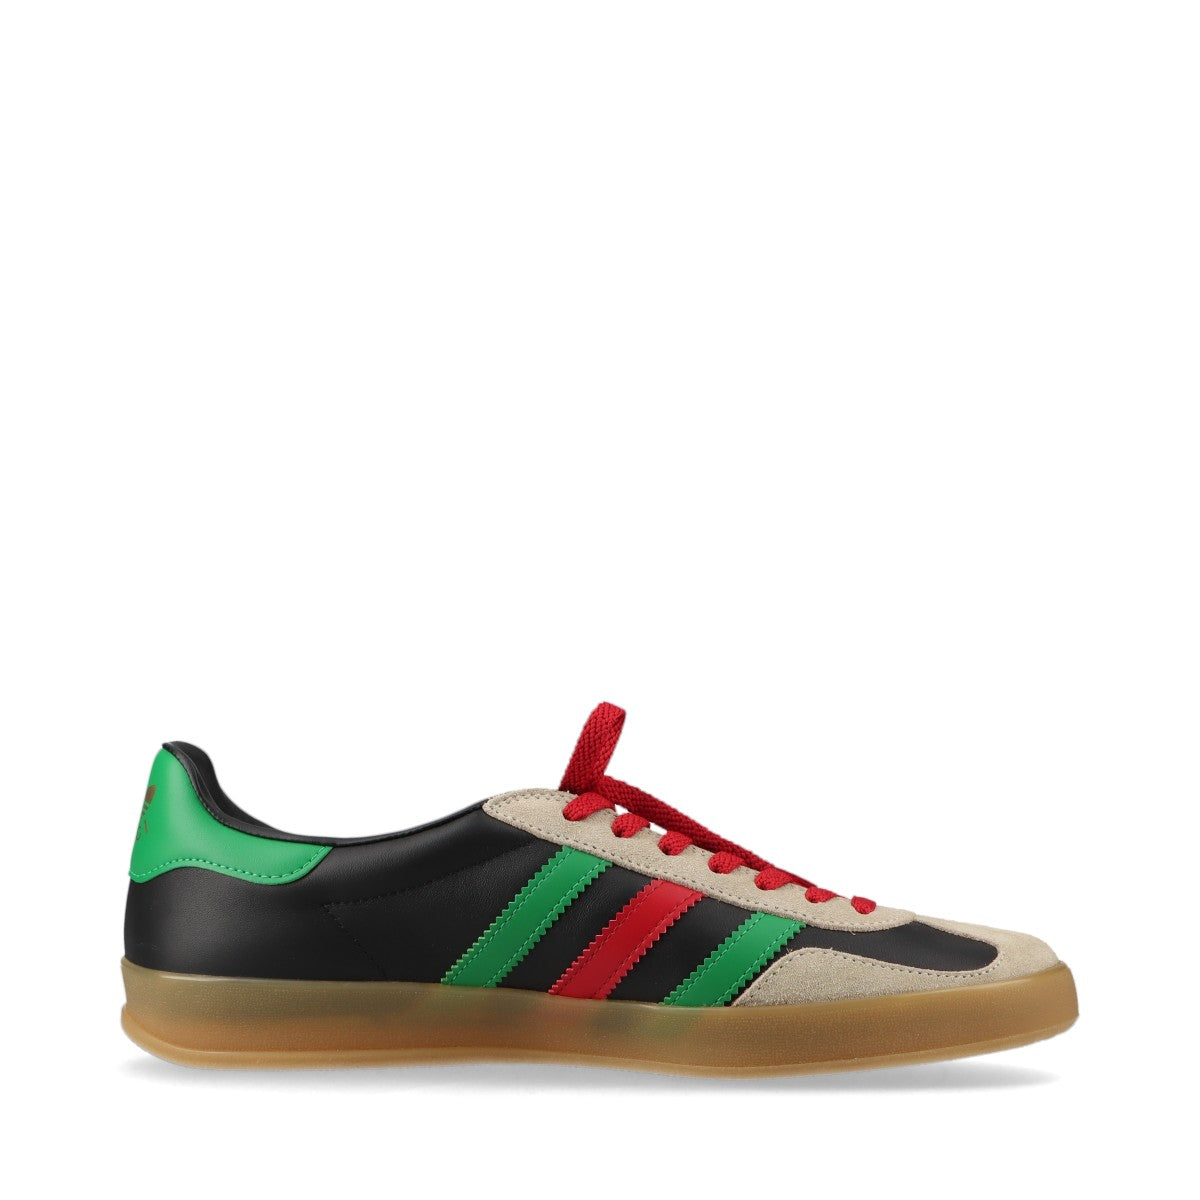 Gucci x Adidas Gazelle Leather & Suede Sneakers 28cm Men's Multicolor 726487 Replacement string Box There is a bag